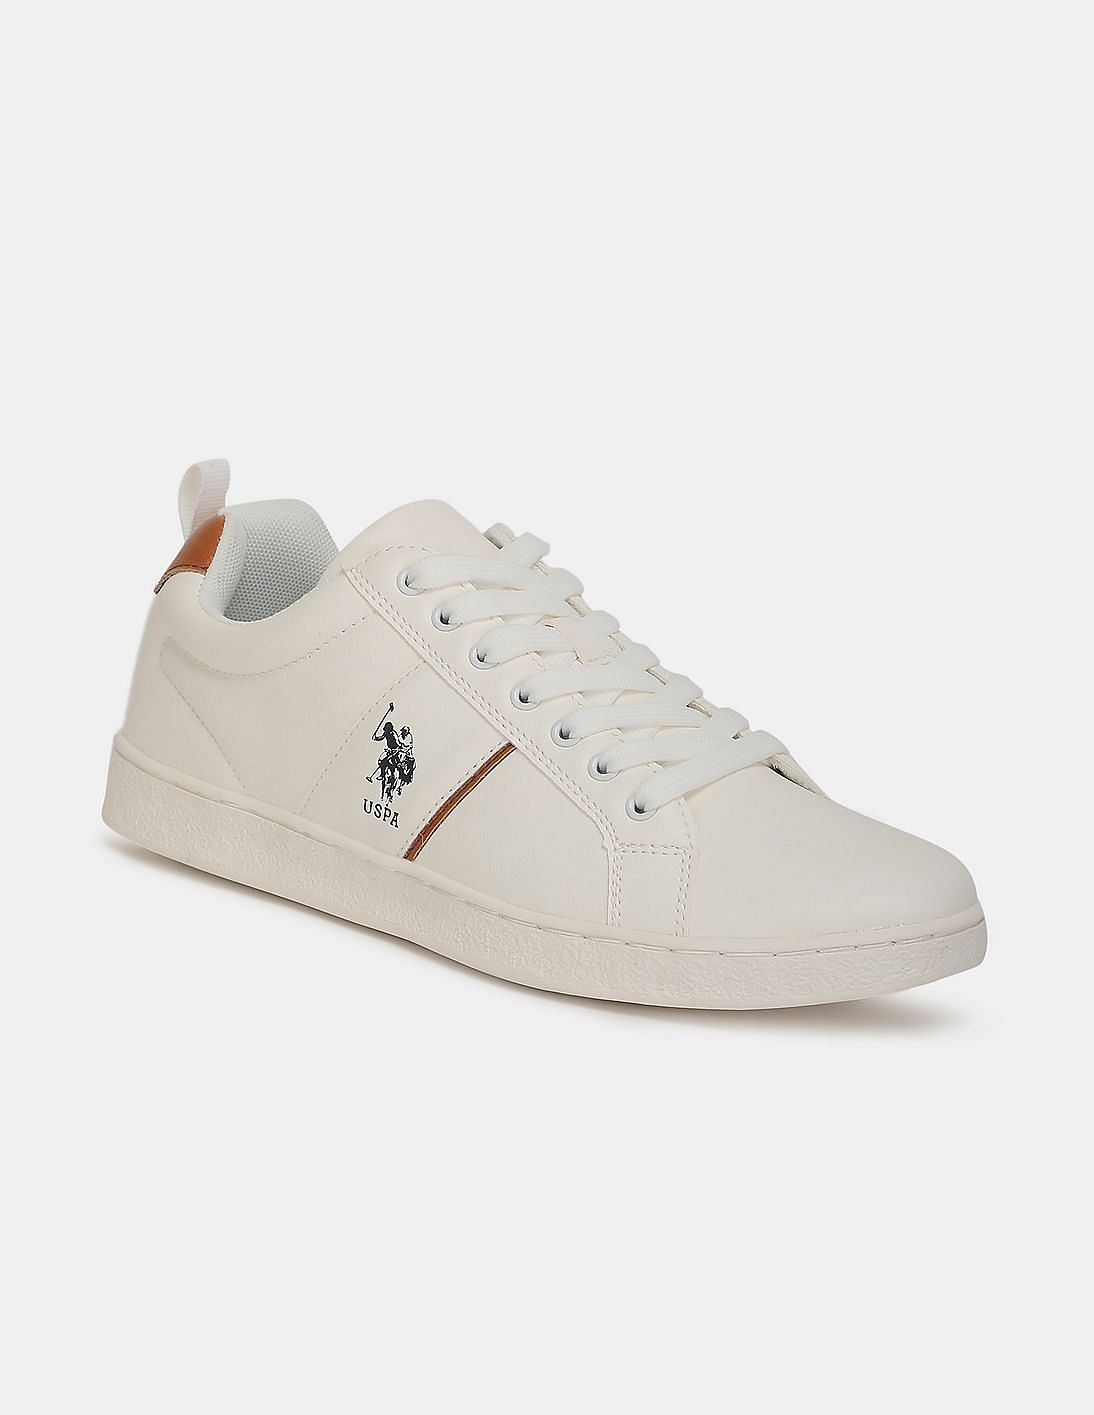 Buy U.S. Polo Assn. Contrast Sole Lace Up Salvador Sneakers - NNNOW.com